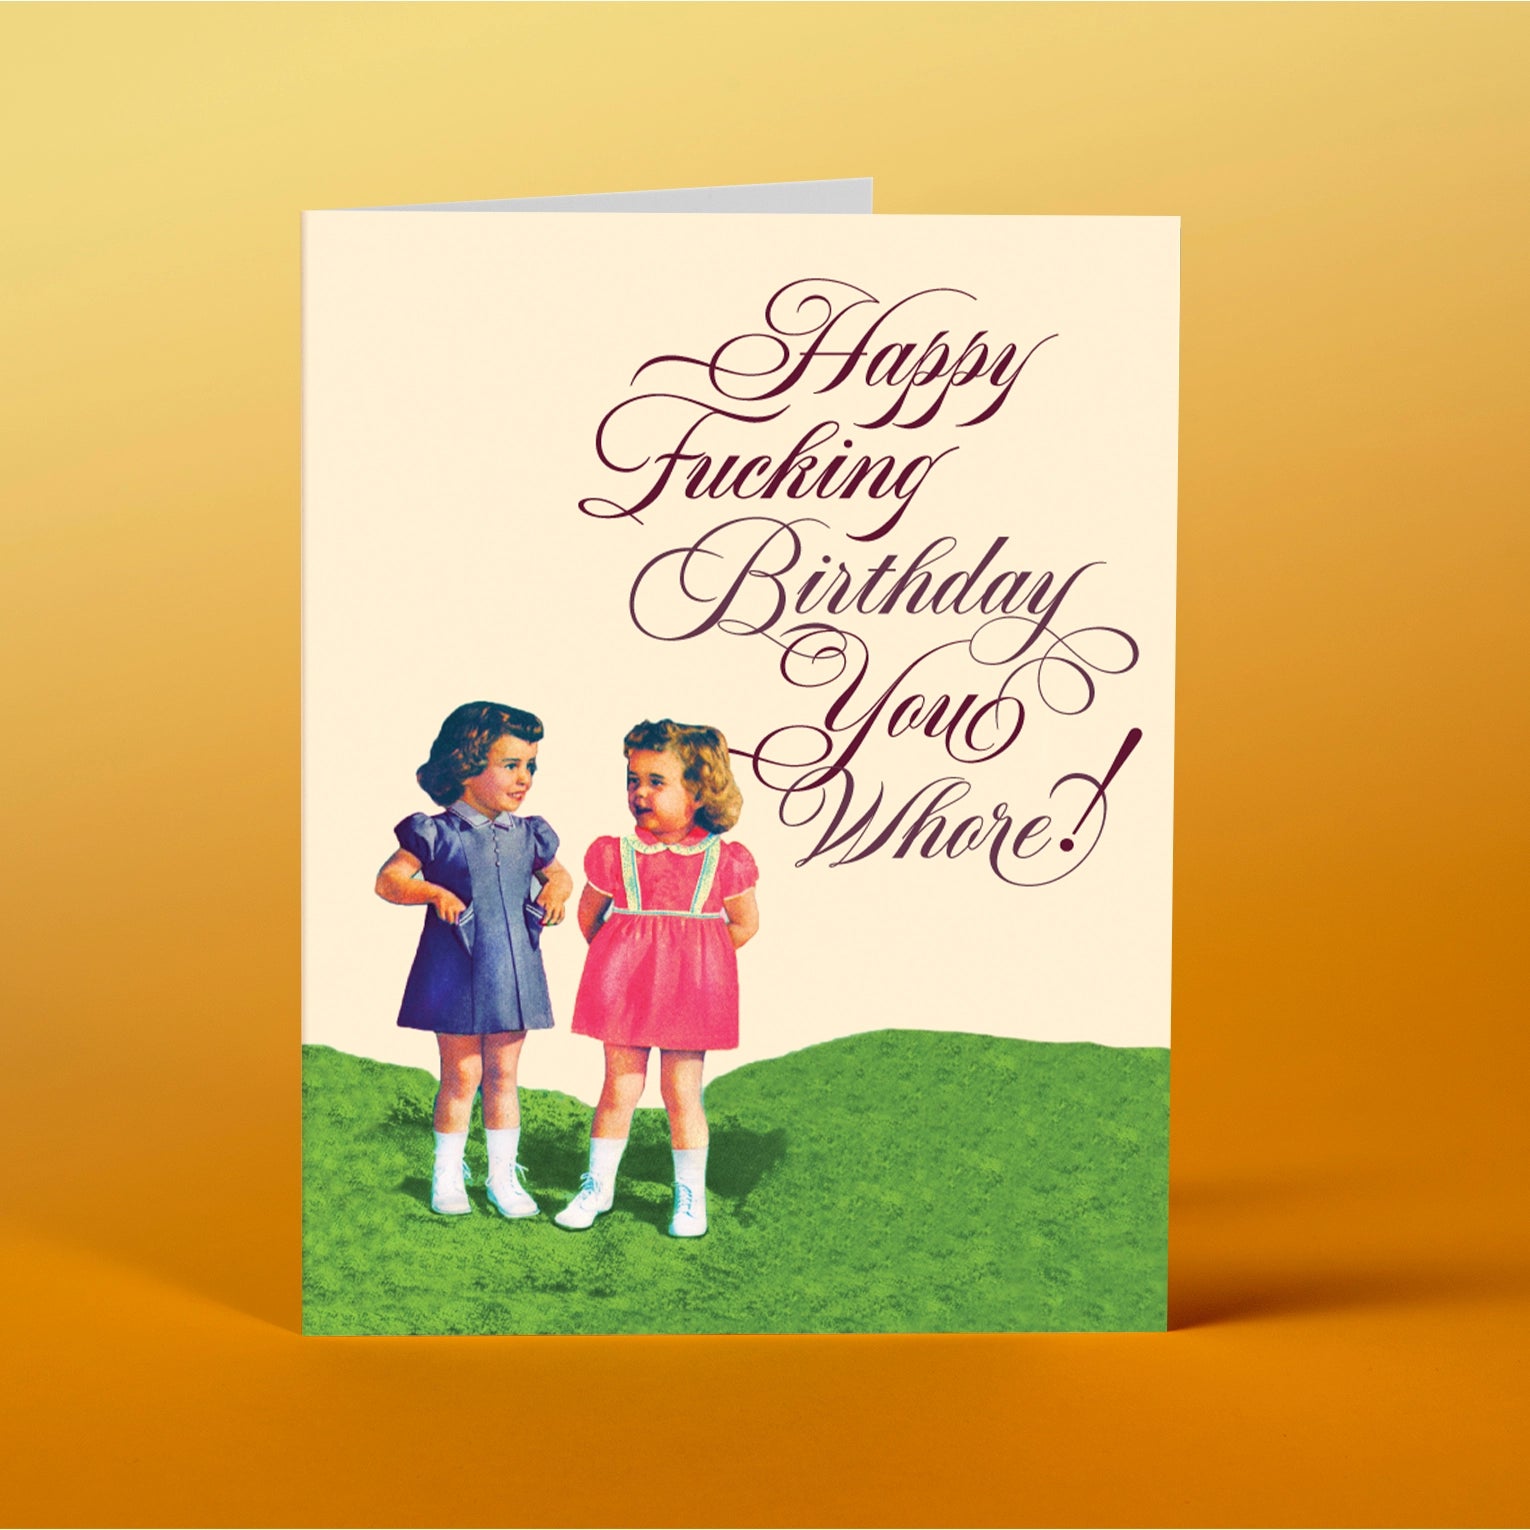 Happy Birthday You Wh*re Greeting Card